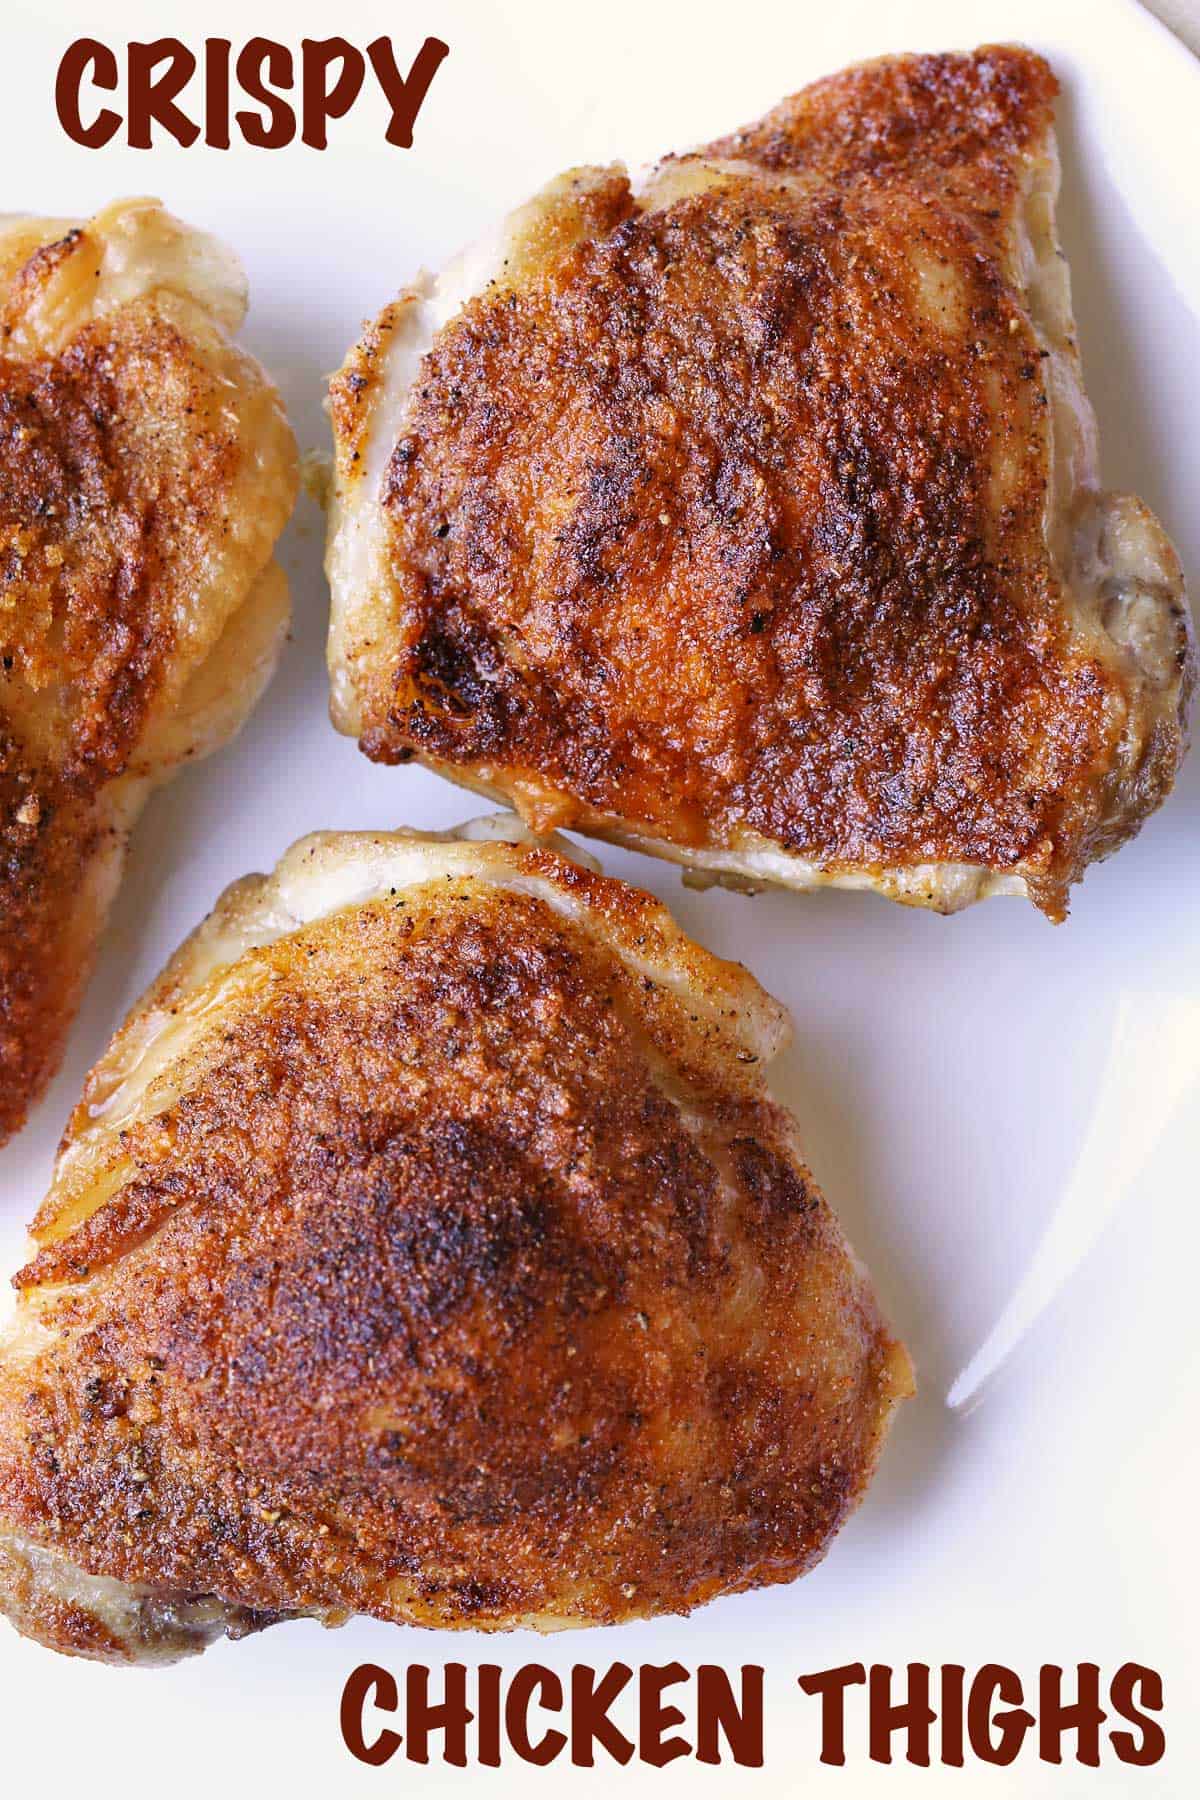 Baked chicken thighs with crispy skin, served on a white plate.